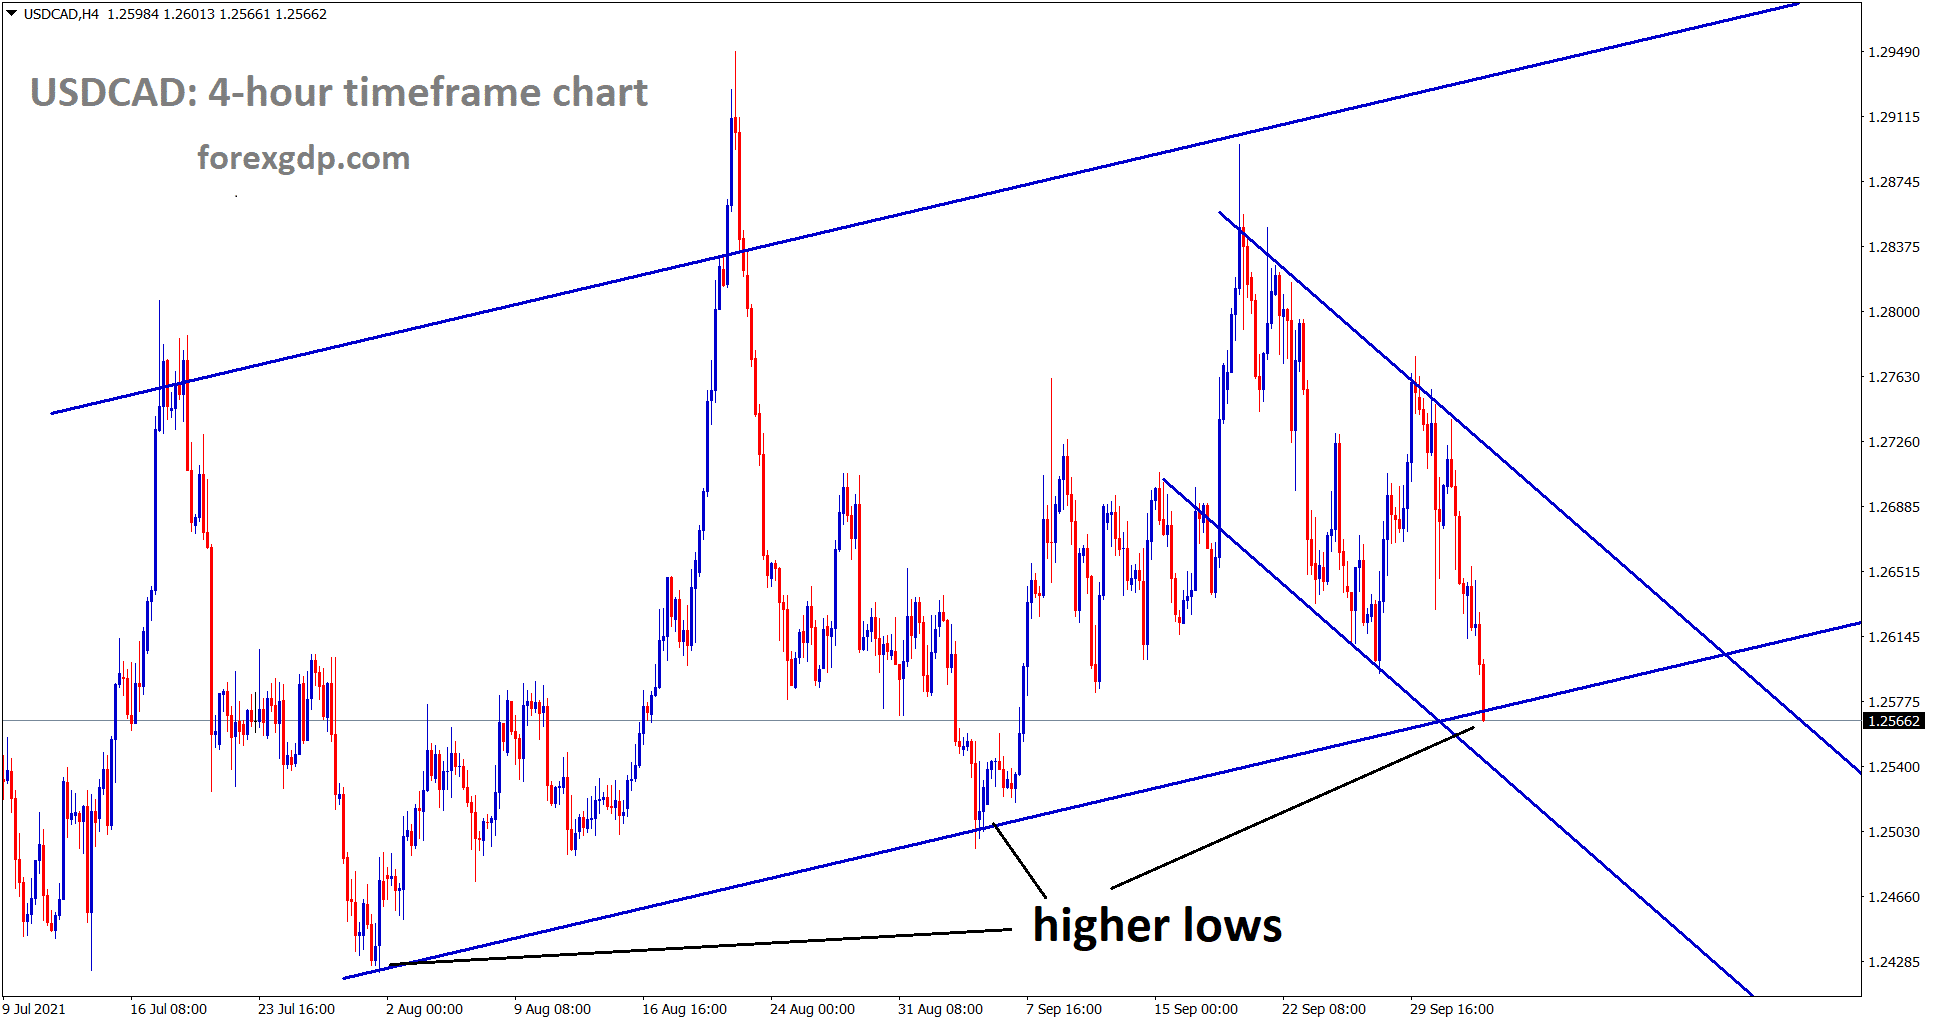 USDCAD has reached the higher low level of an uptrend line wait for breakout or reversal.